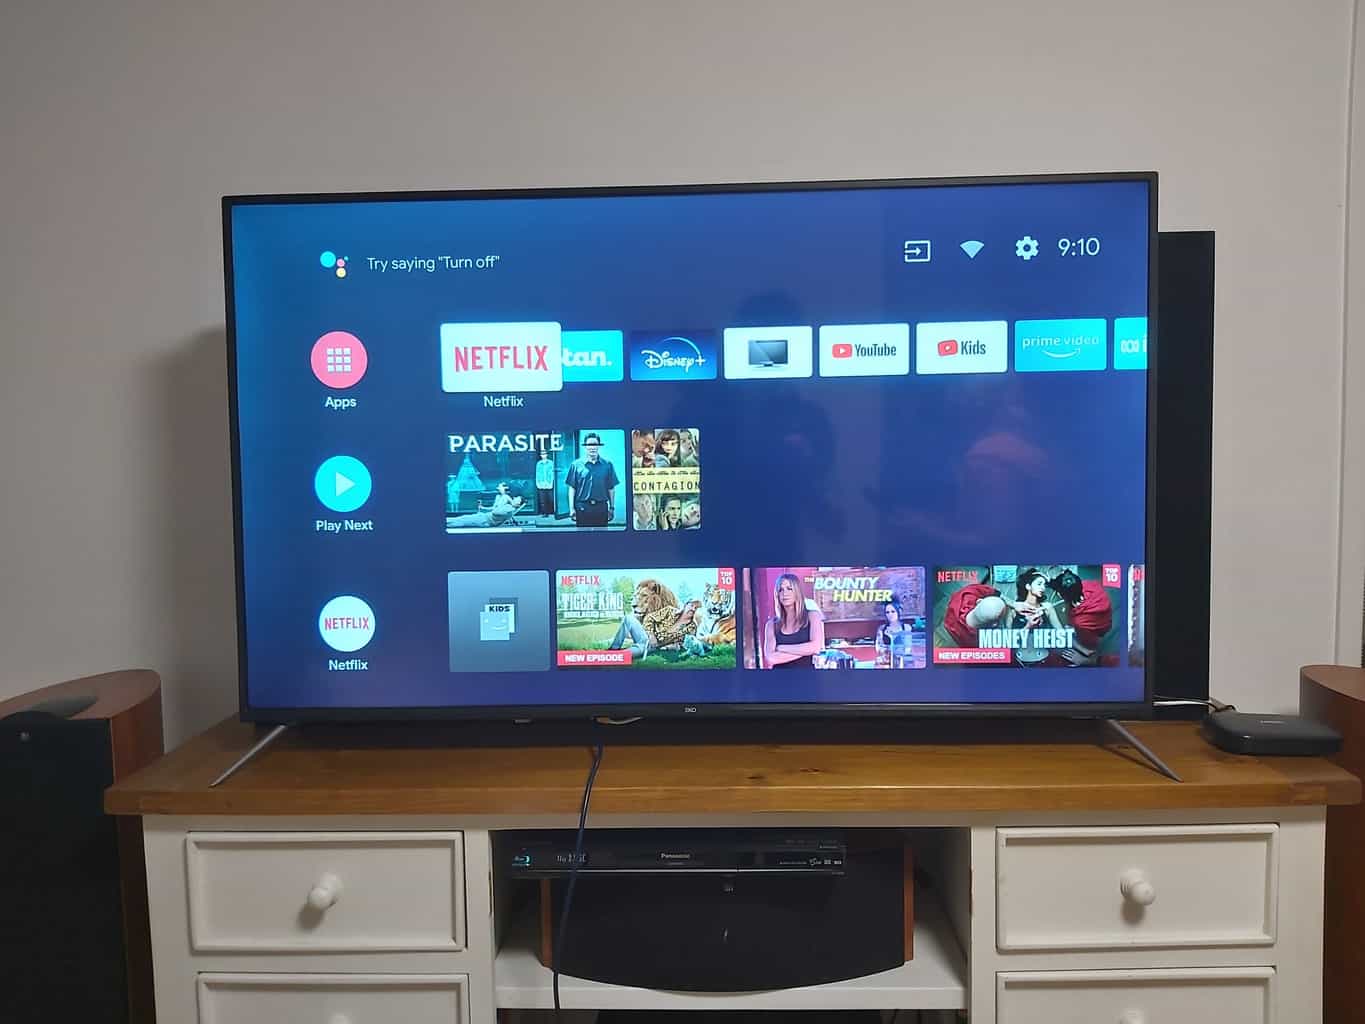 This is the Home Screen panel for the EKO Android TV.